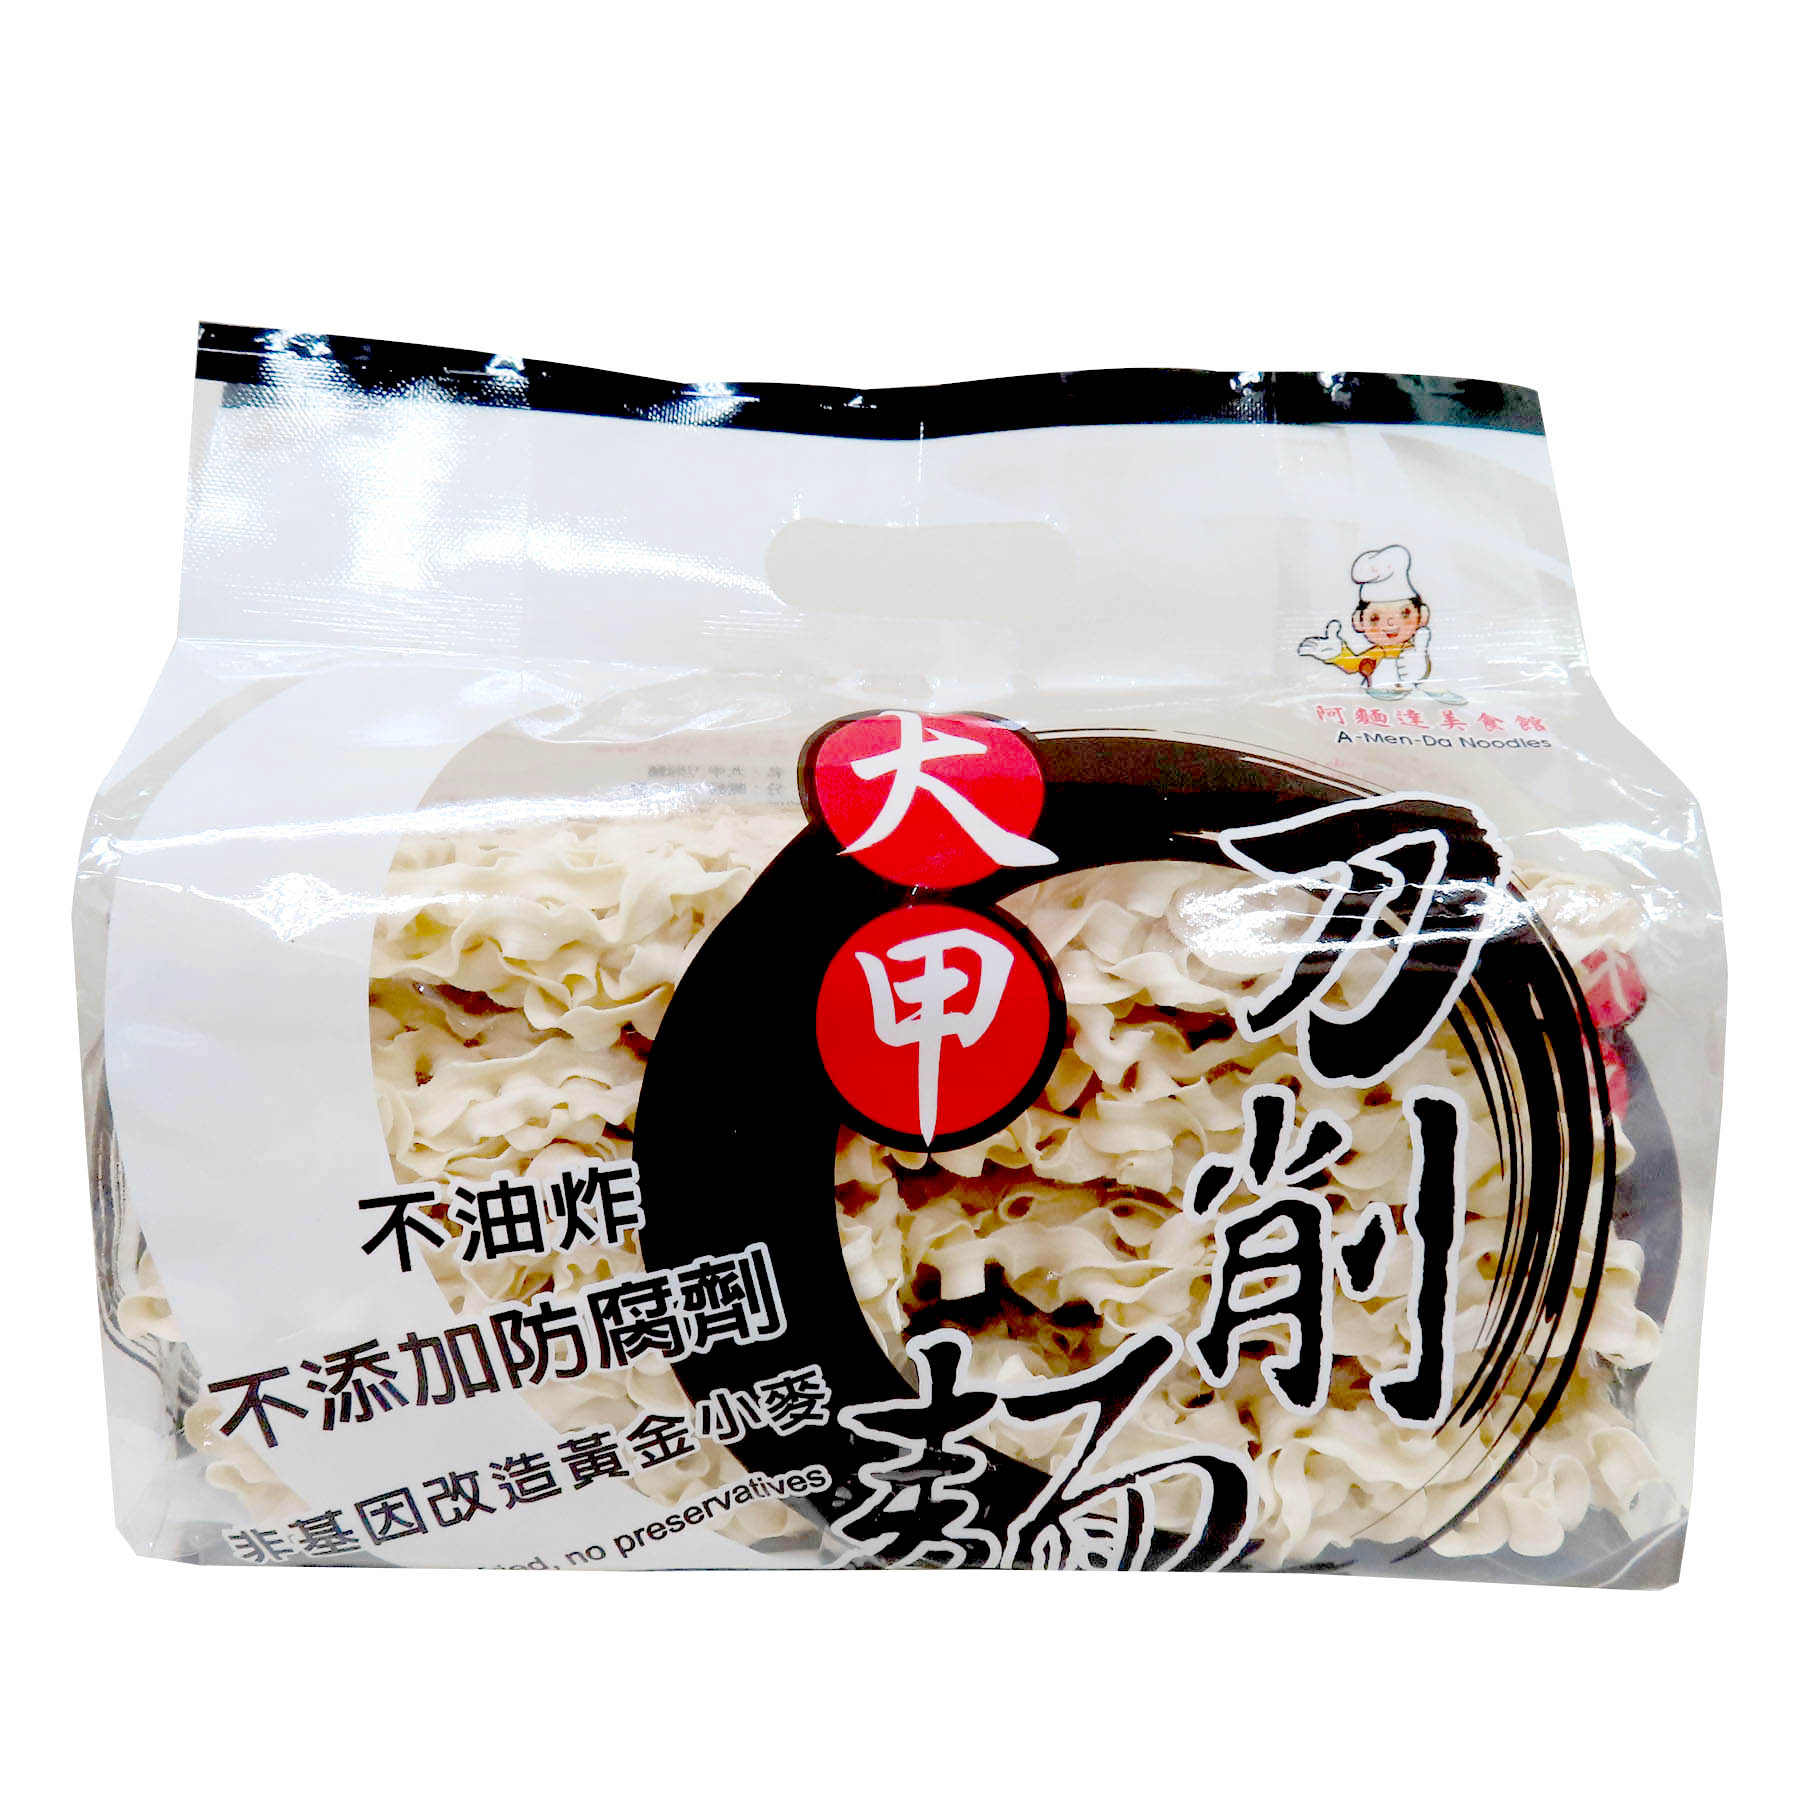 Image Dajia Thick knife sliced Daoxiao Noodle 大甲刀削面 600grams